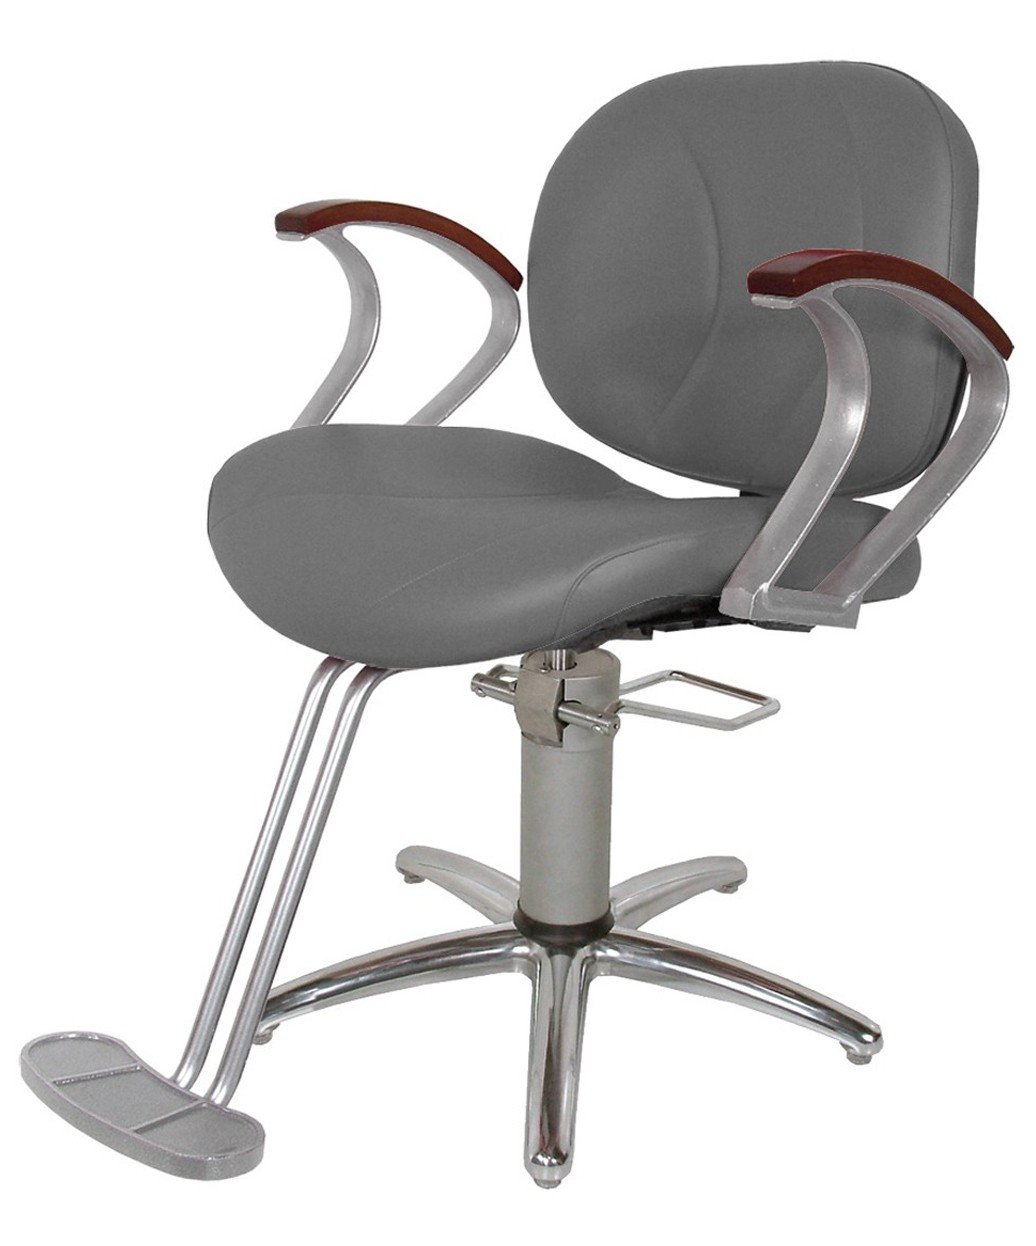 Collins 5500 Belize Styling Chair